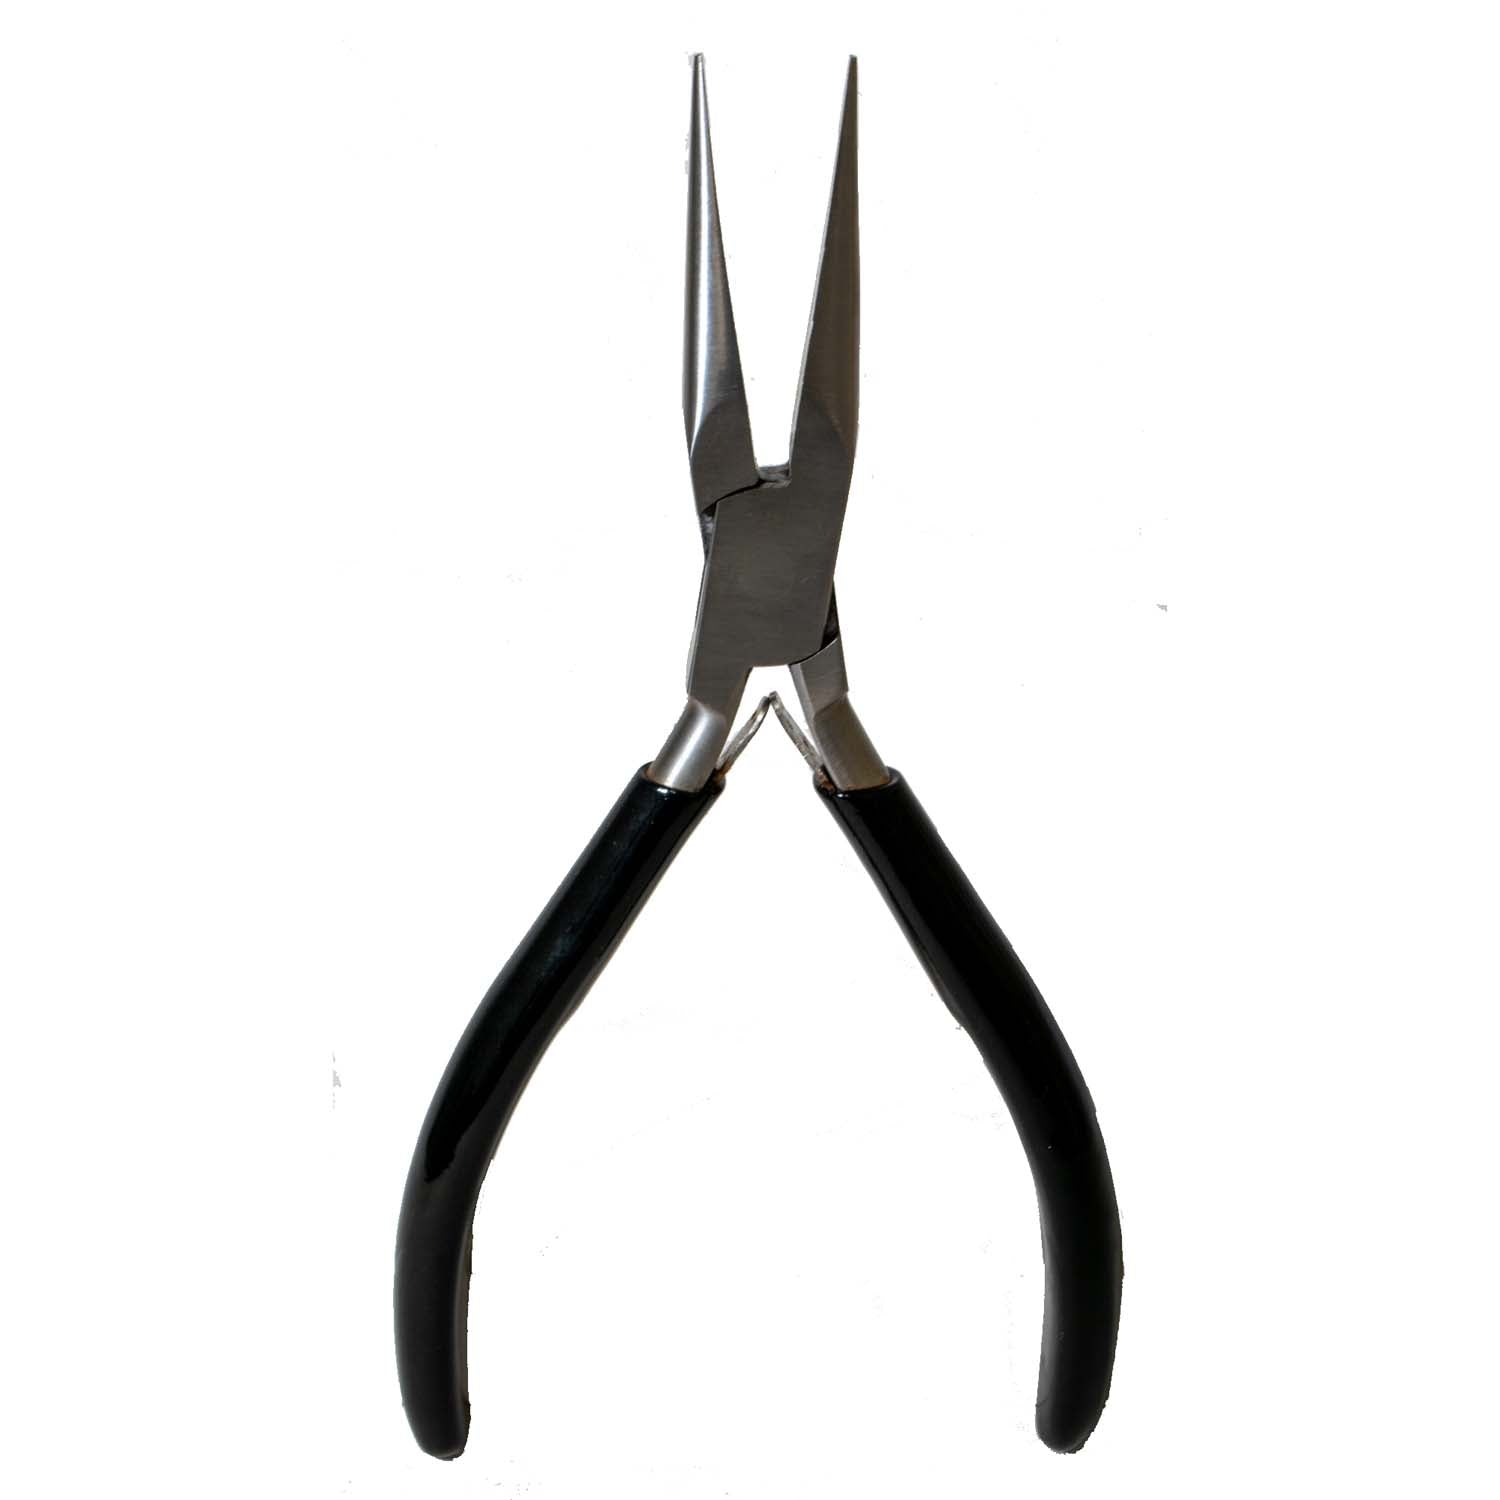 Chain nose pliers, very fine, 6 inches